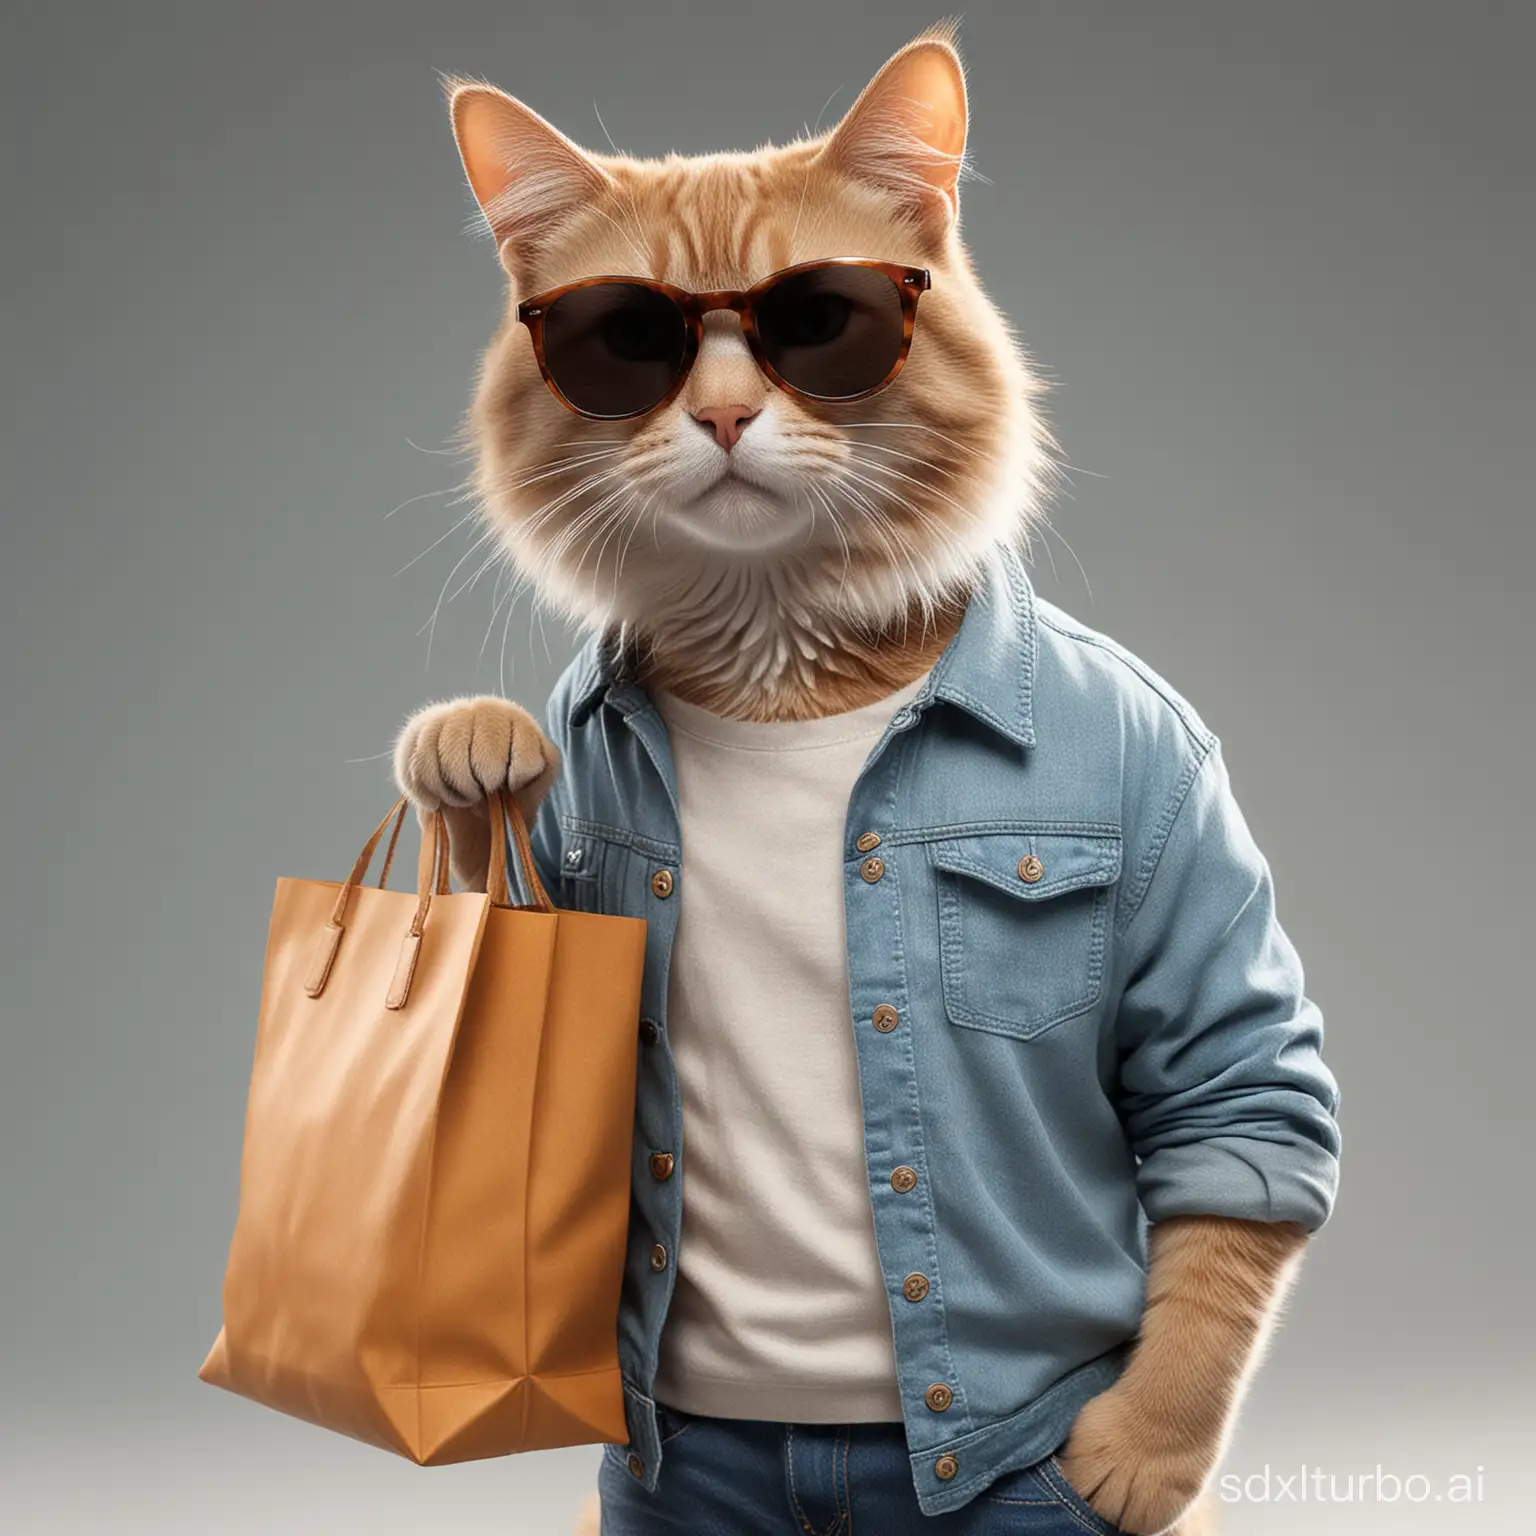 Stylish-Cat-Shopping-in-Casual-Wear-and-Sunglasses